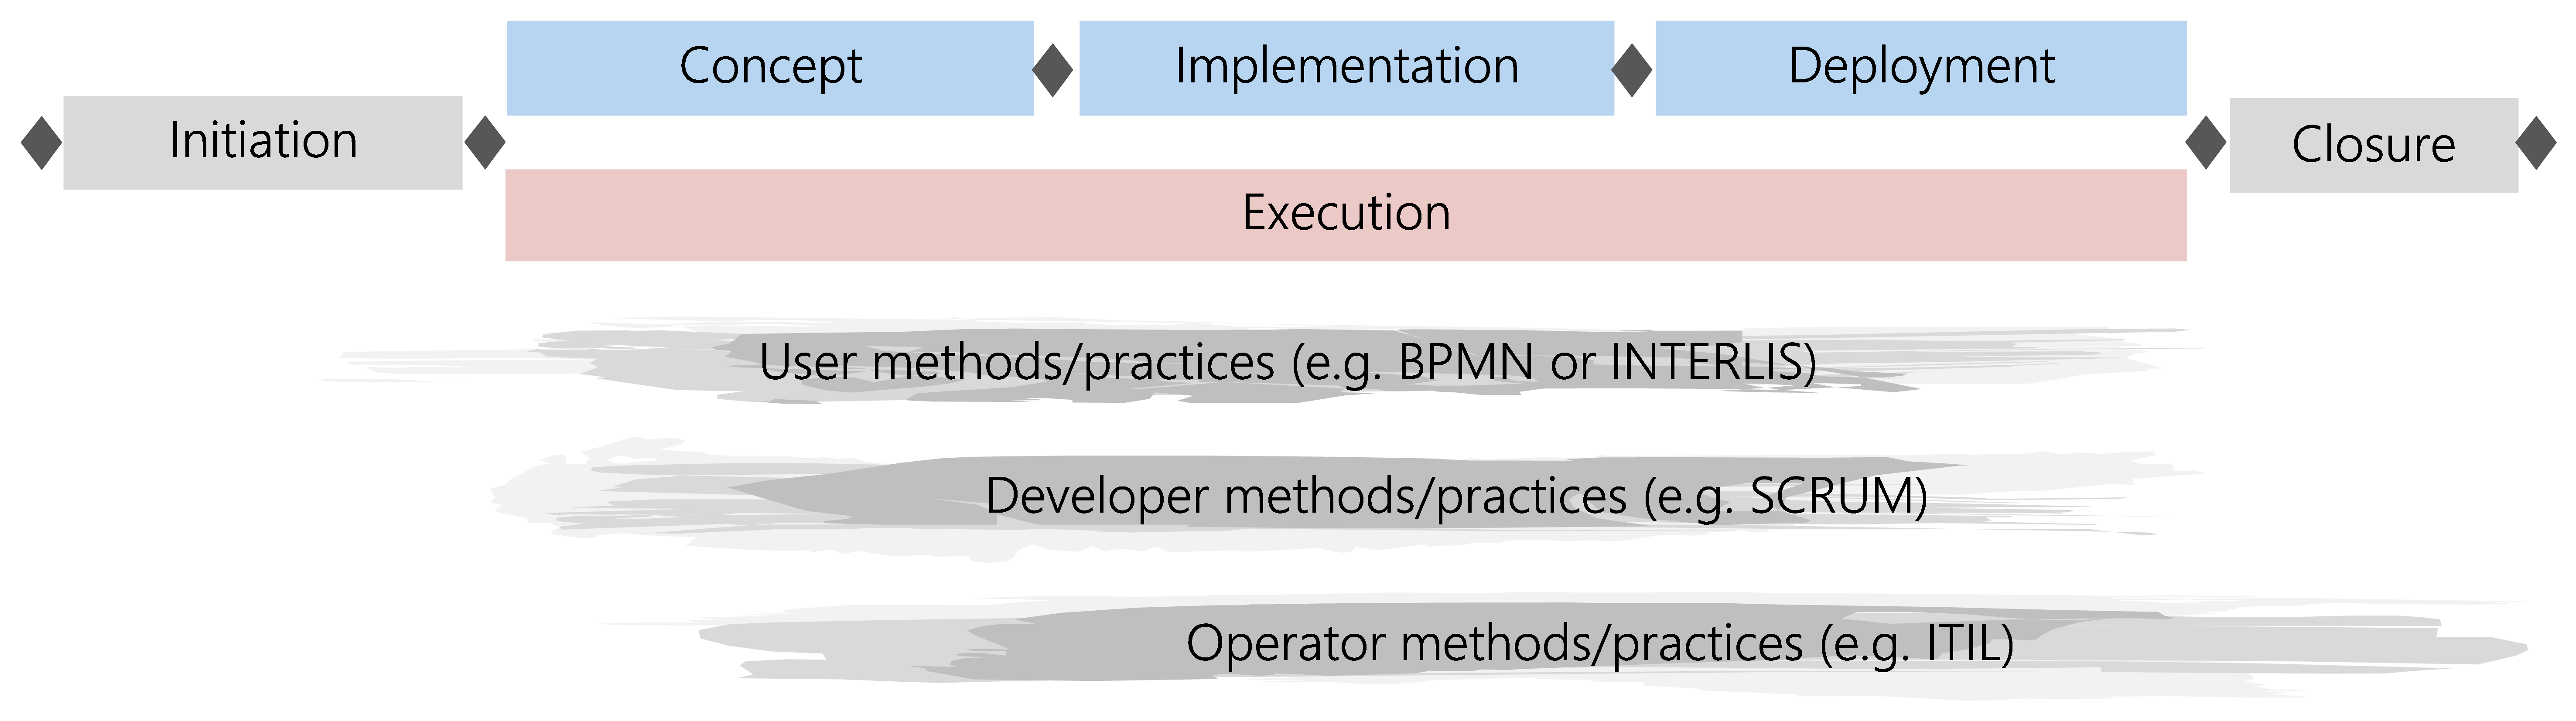 Figure 37: Use of supplementary methods and practices